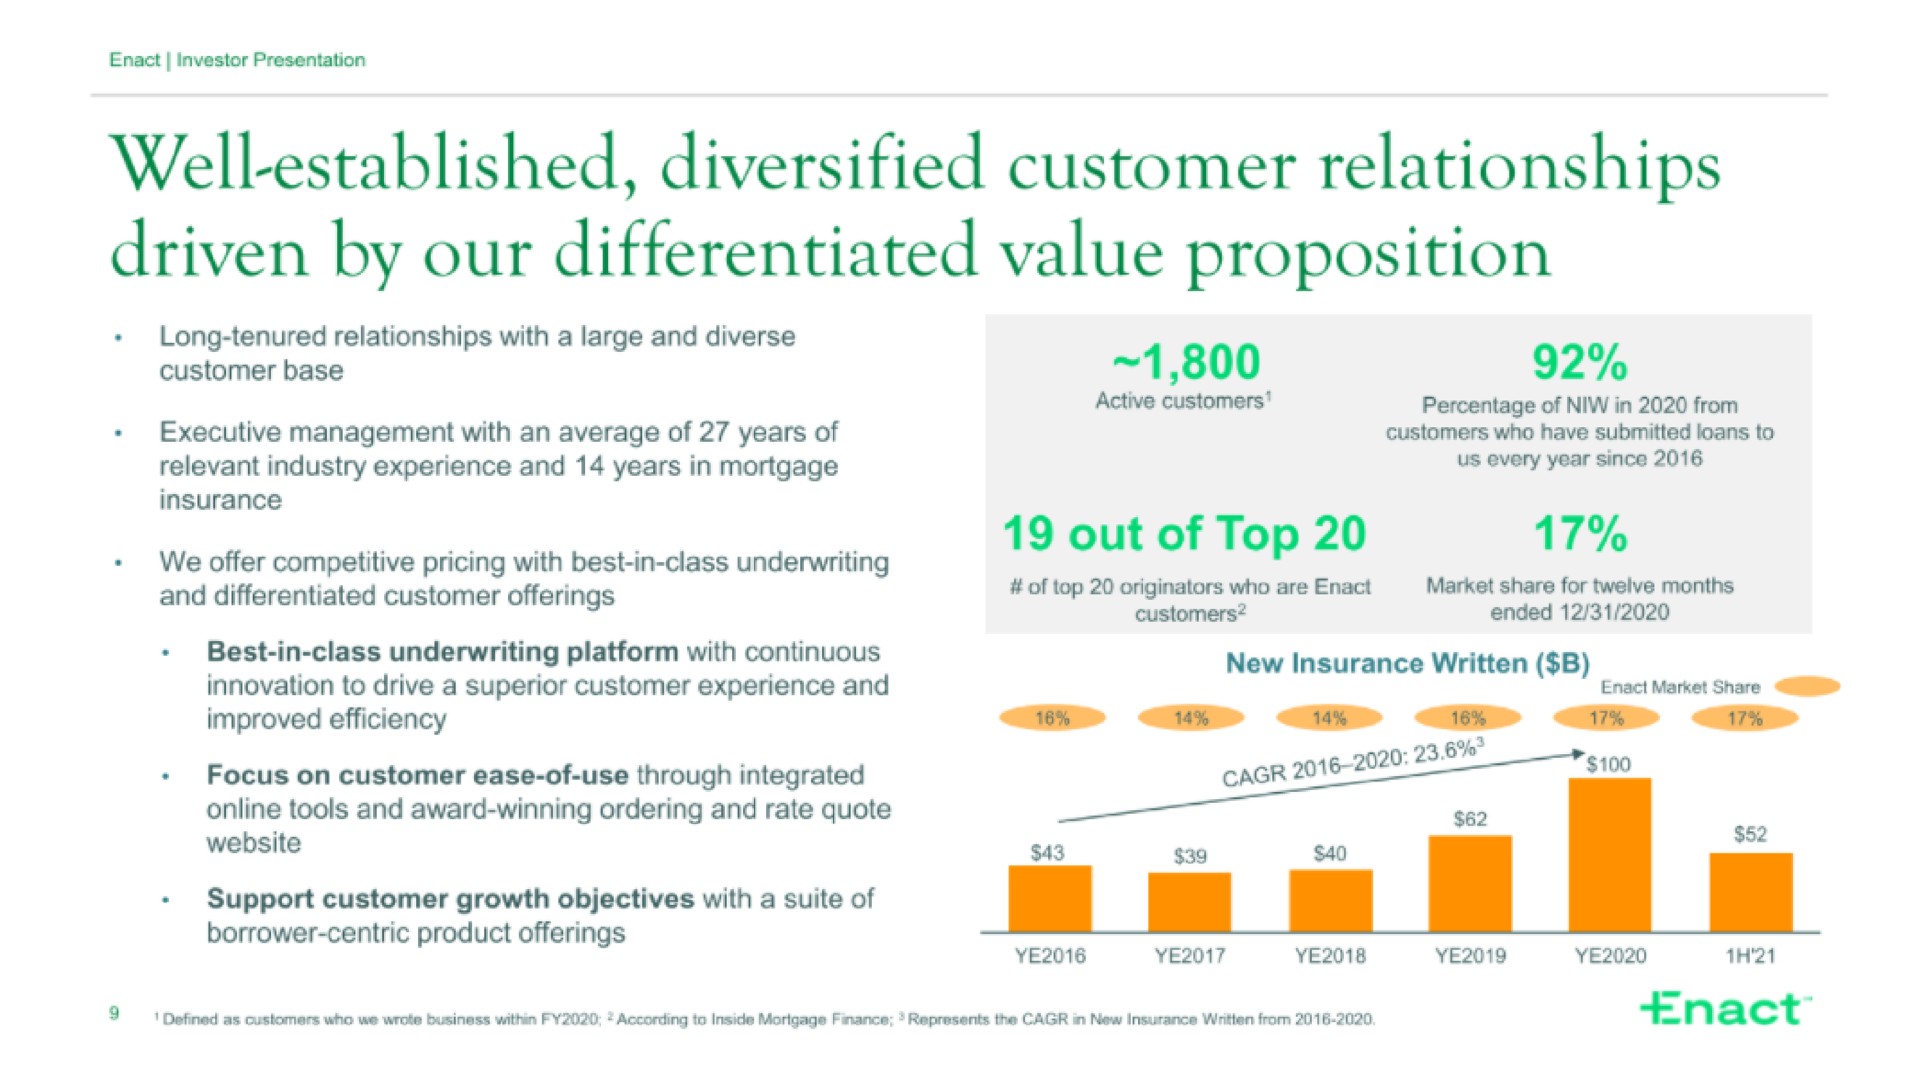 well established diversified customer relationships driven by our differentiated value proposition | Enact